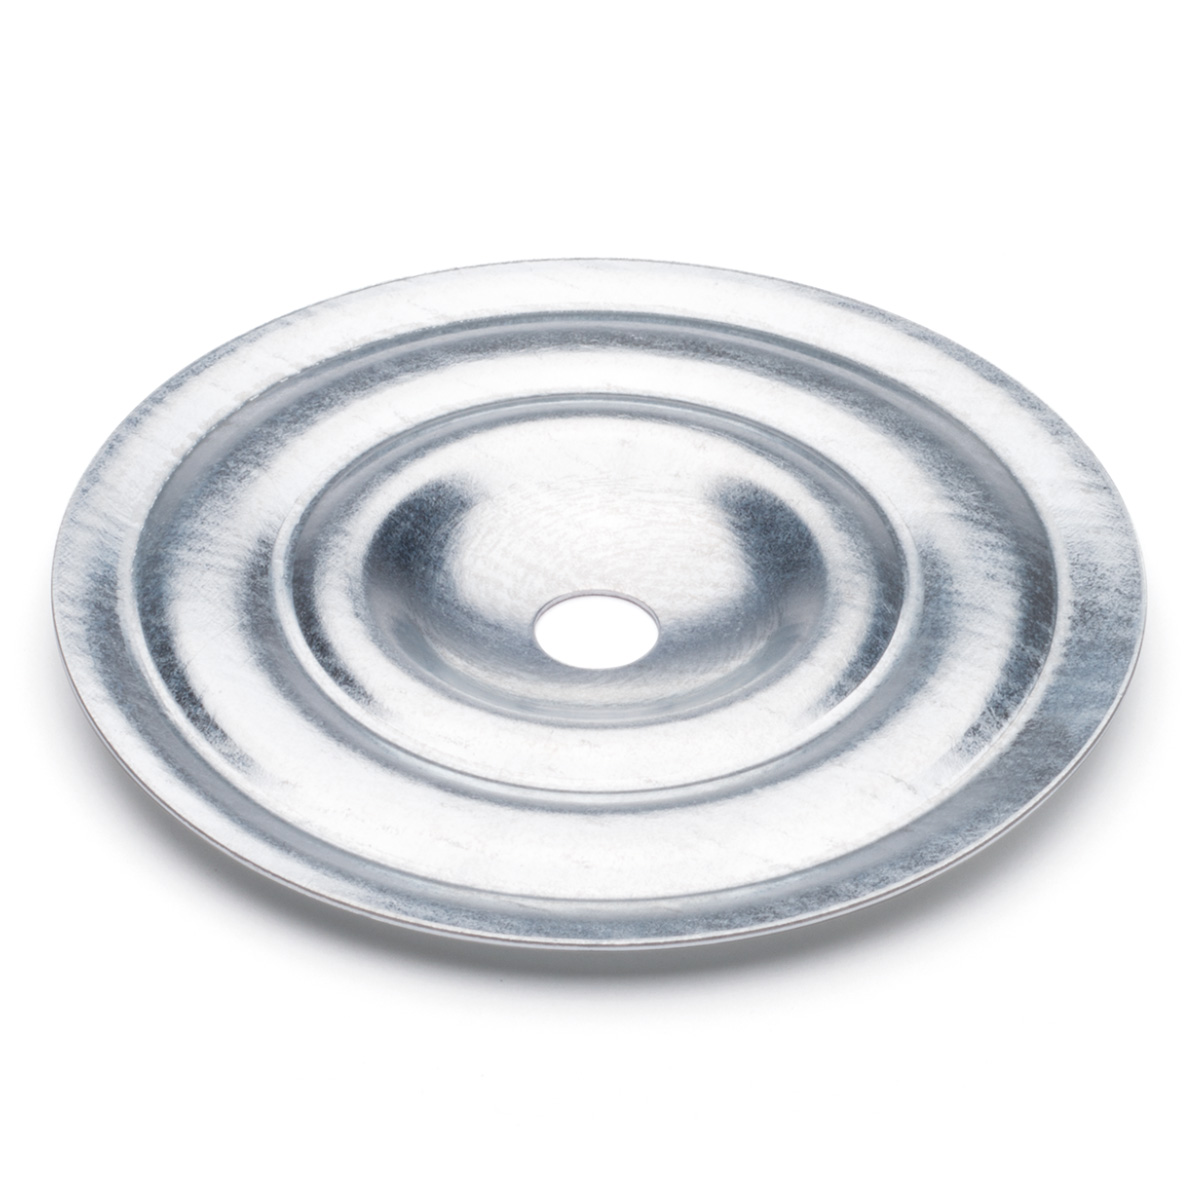 Washer for coverings - Metal